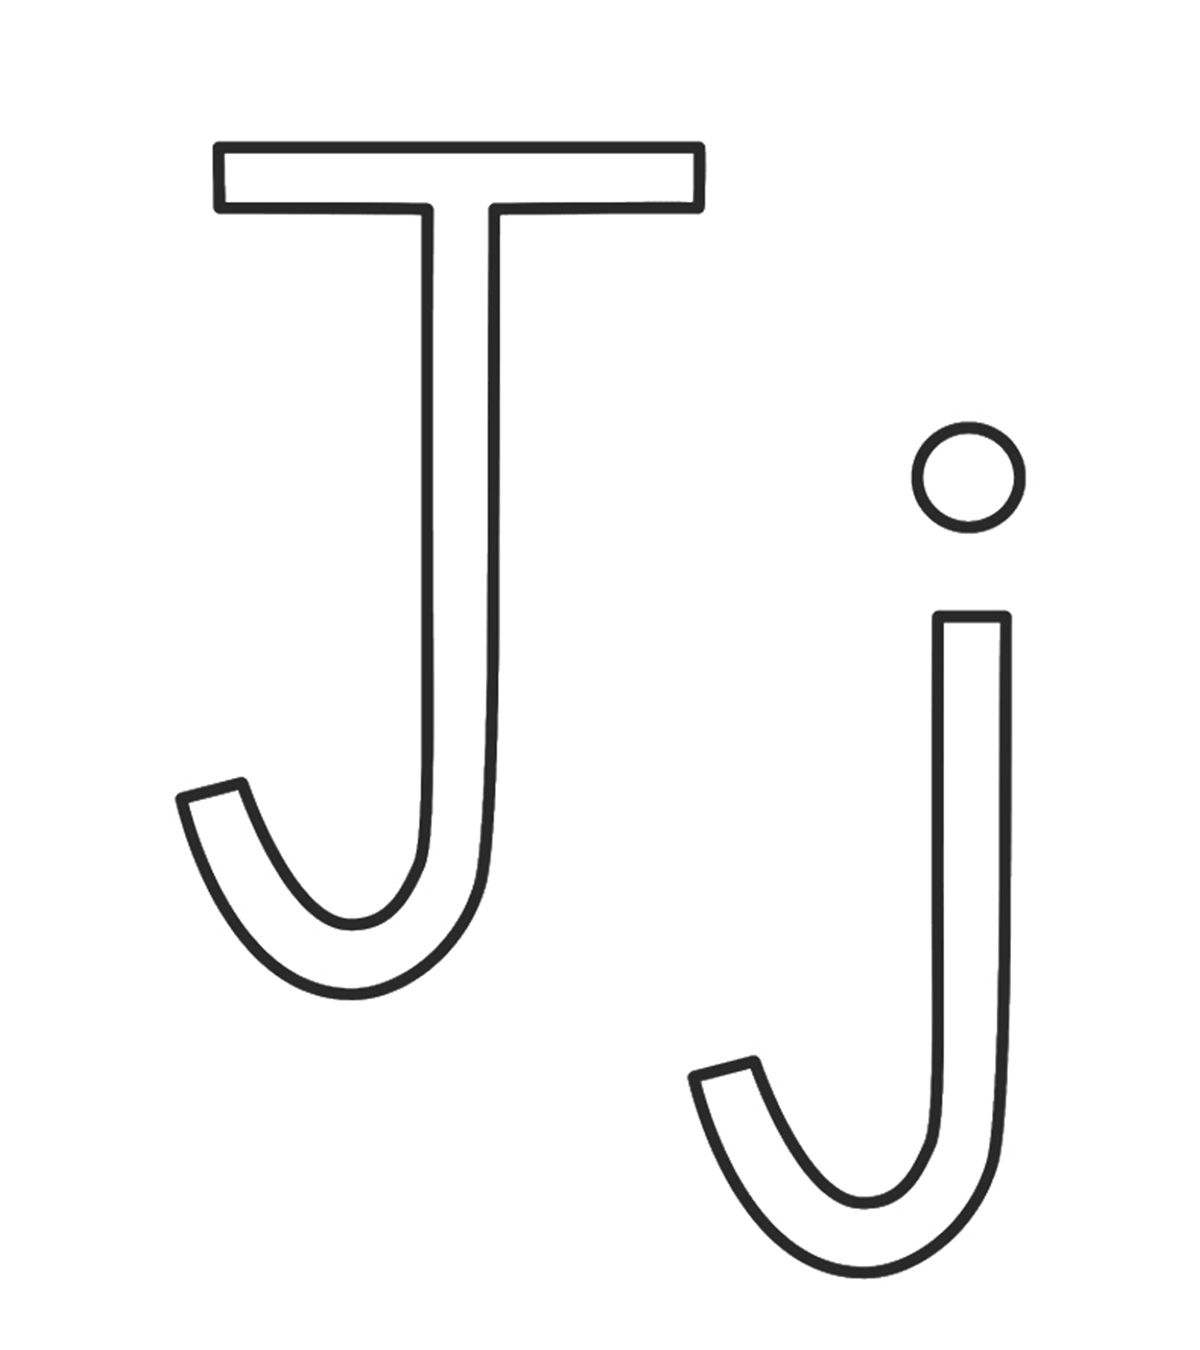 Letter J Coloring Page - Coloring Our World